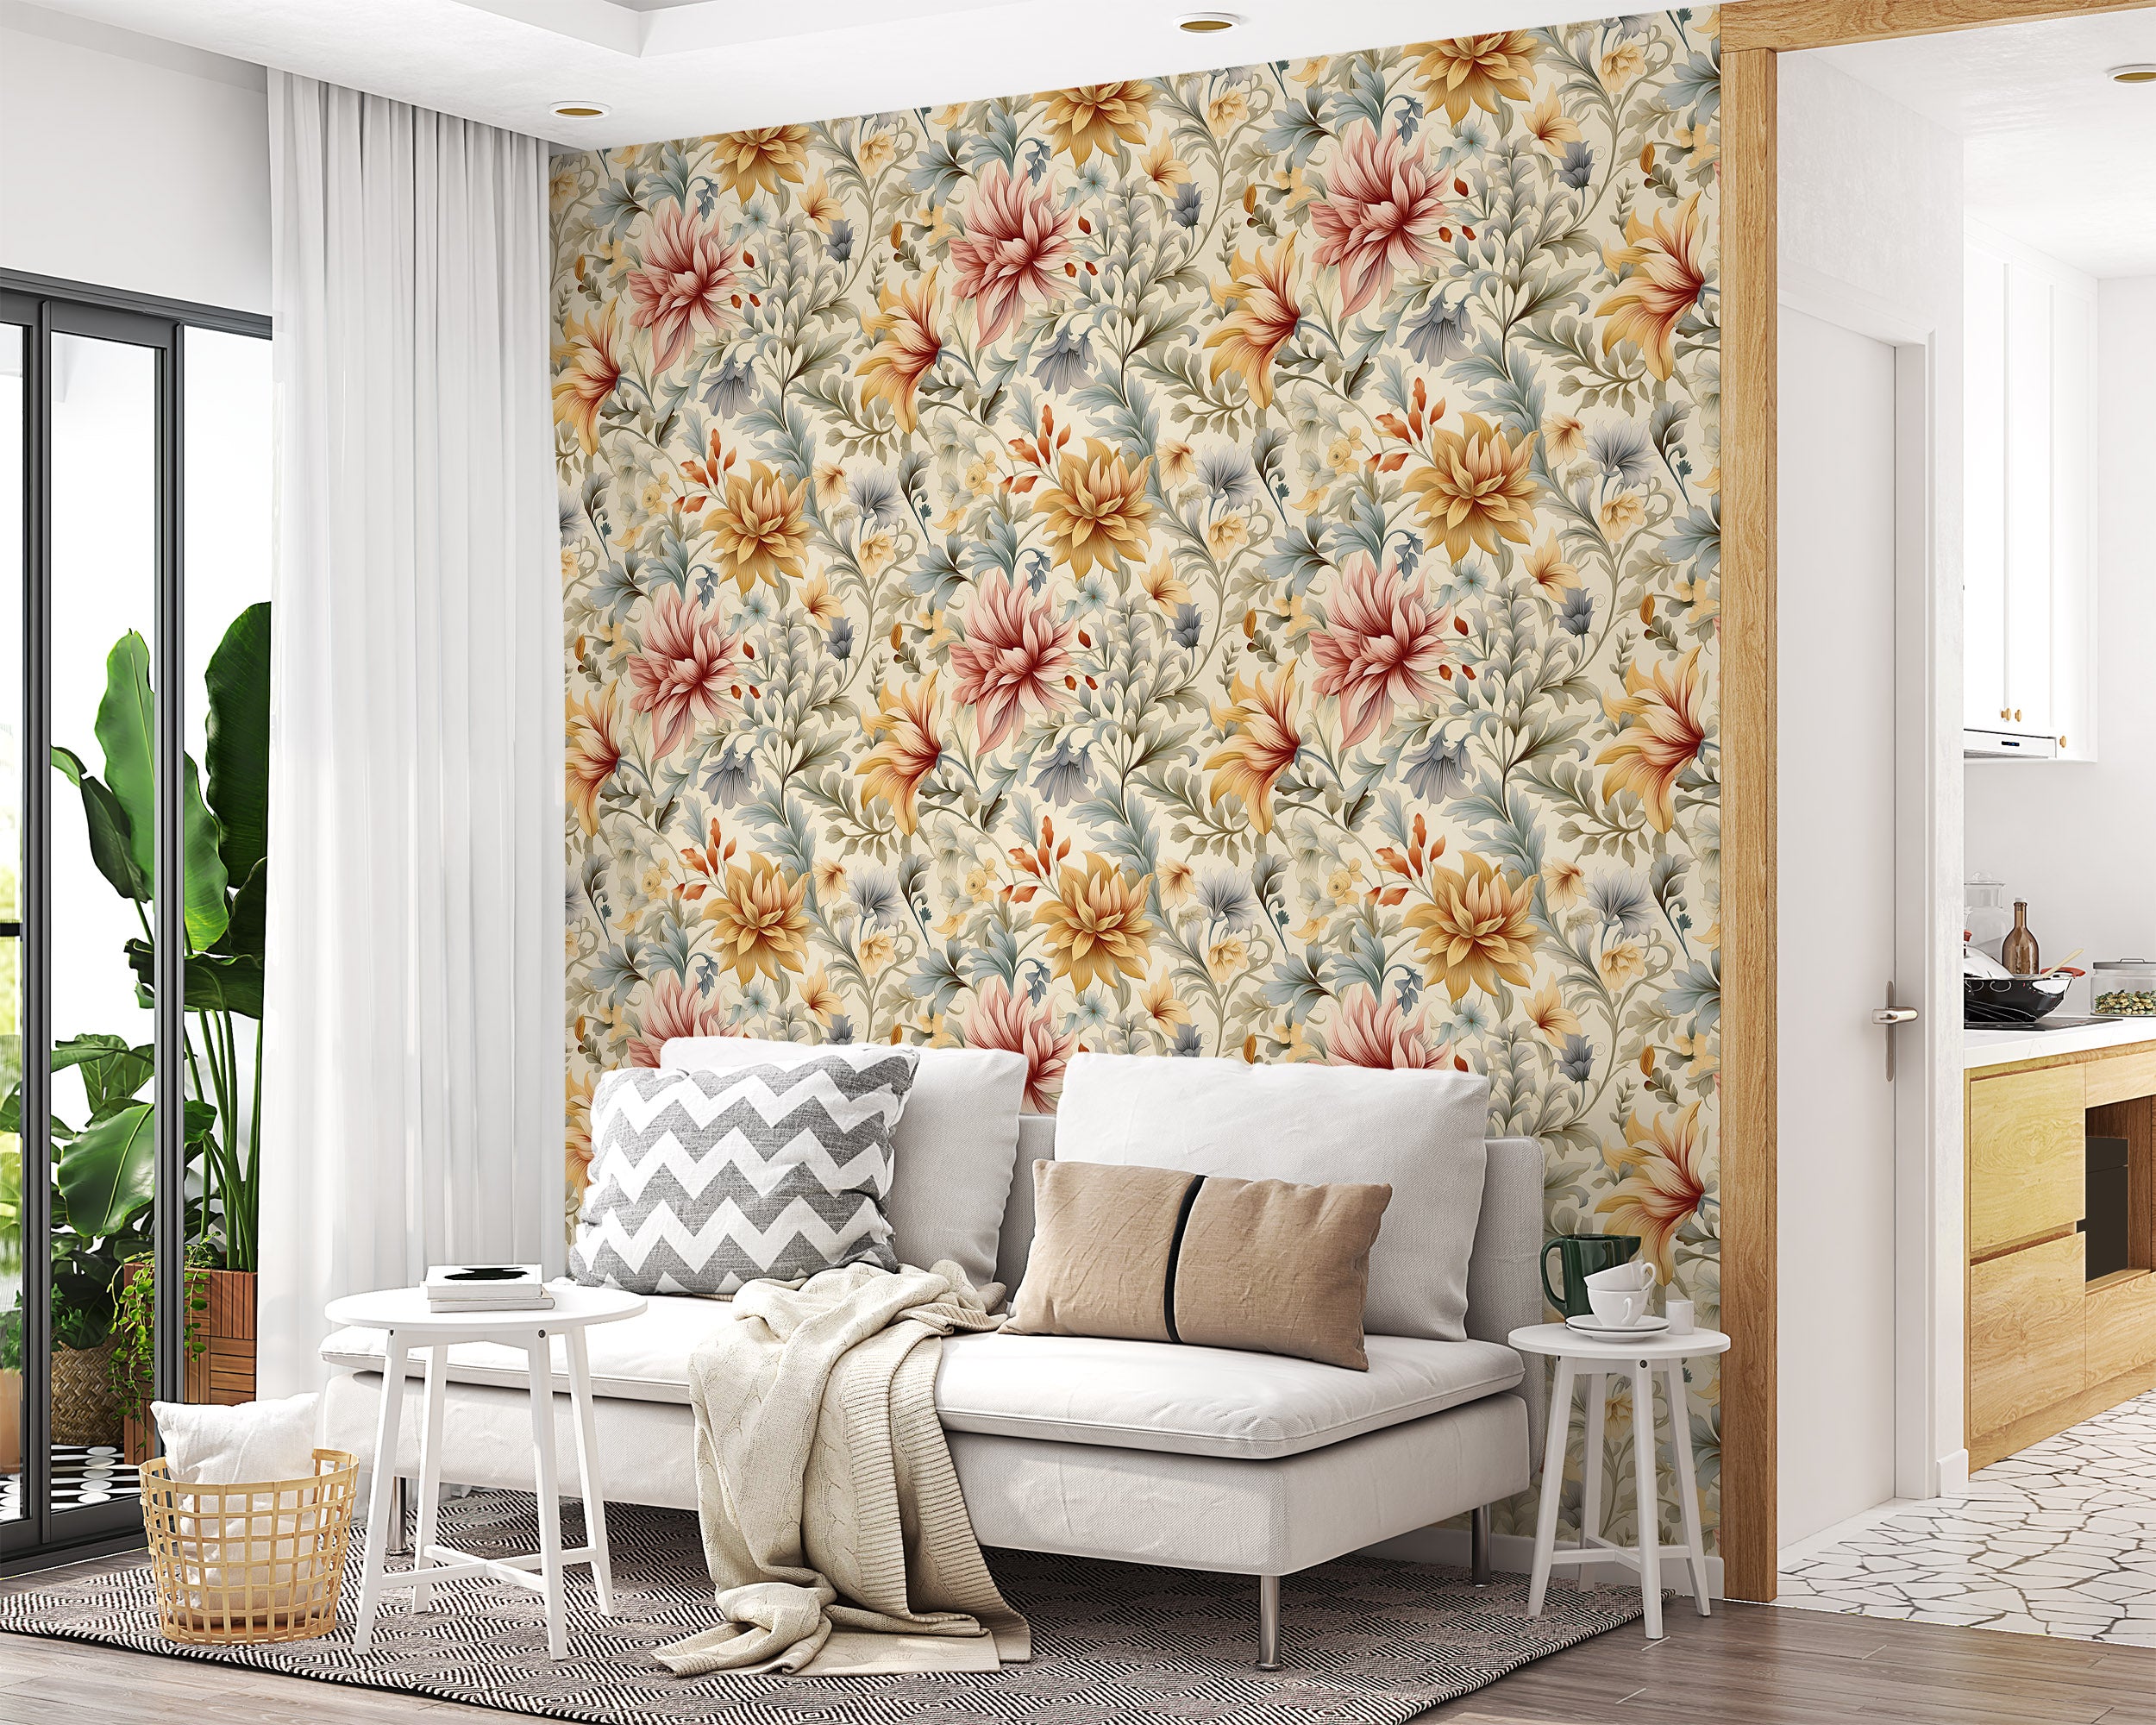 Lively Floral Pattern Enhancing Room Aesthetics